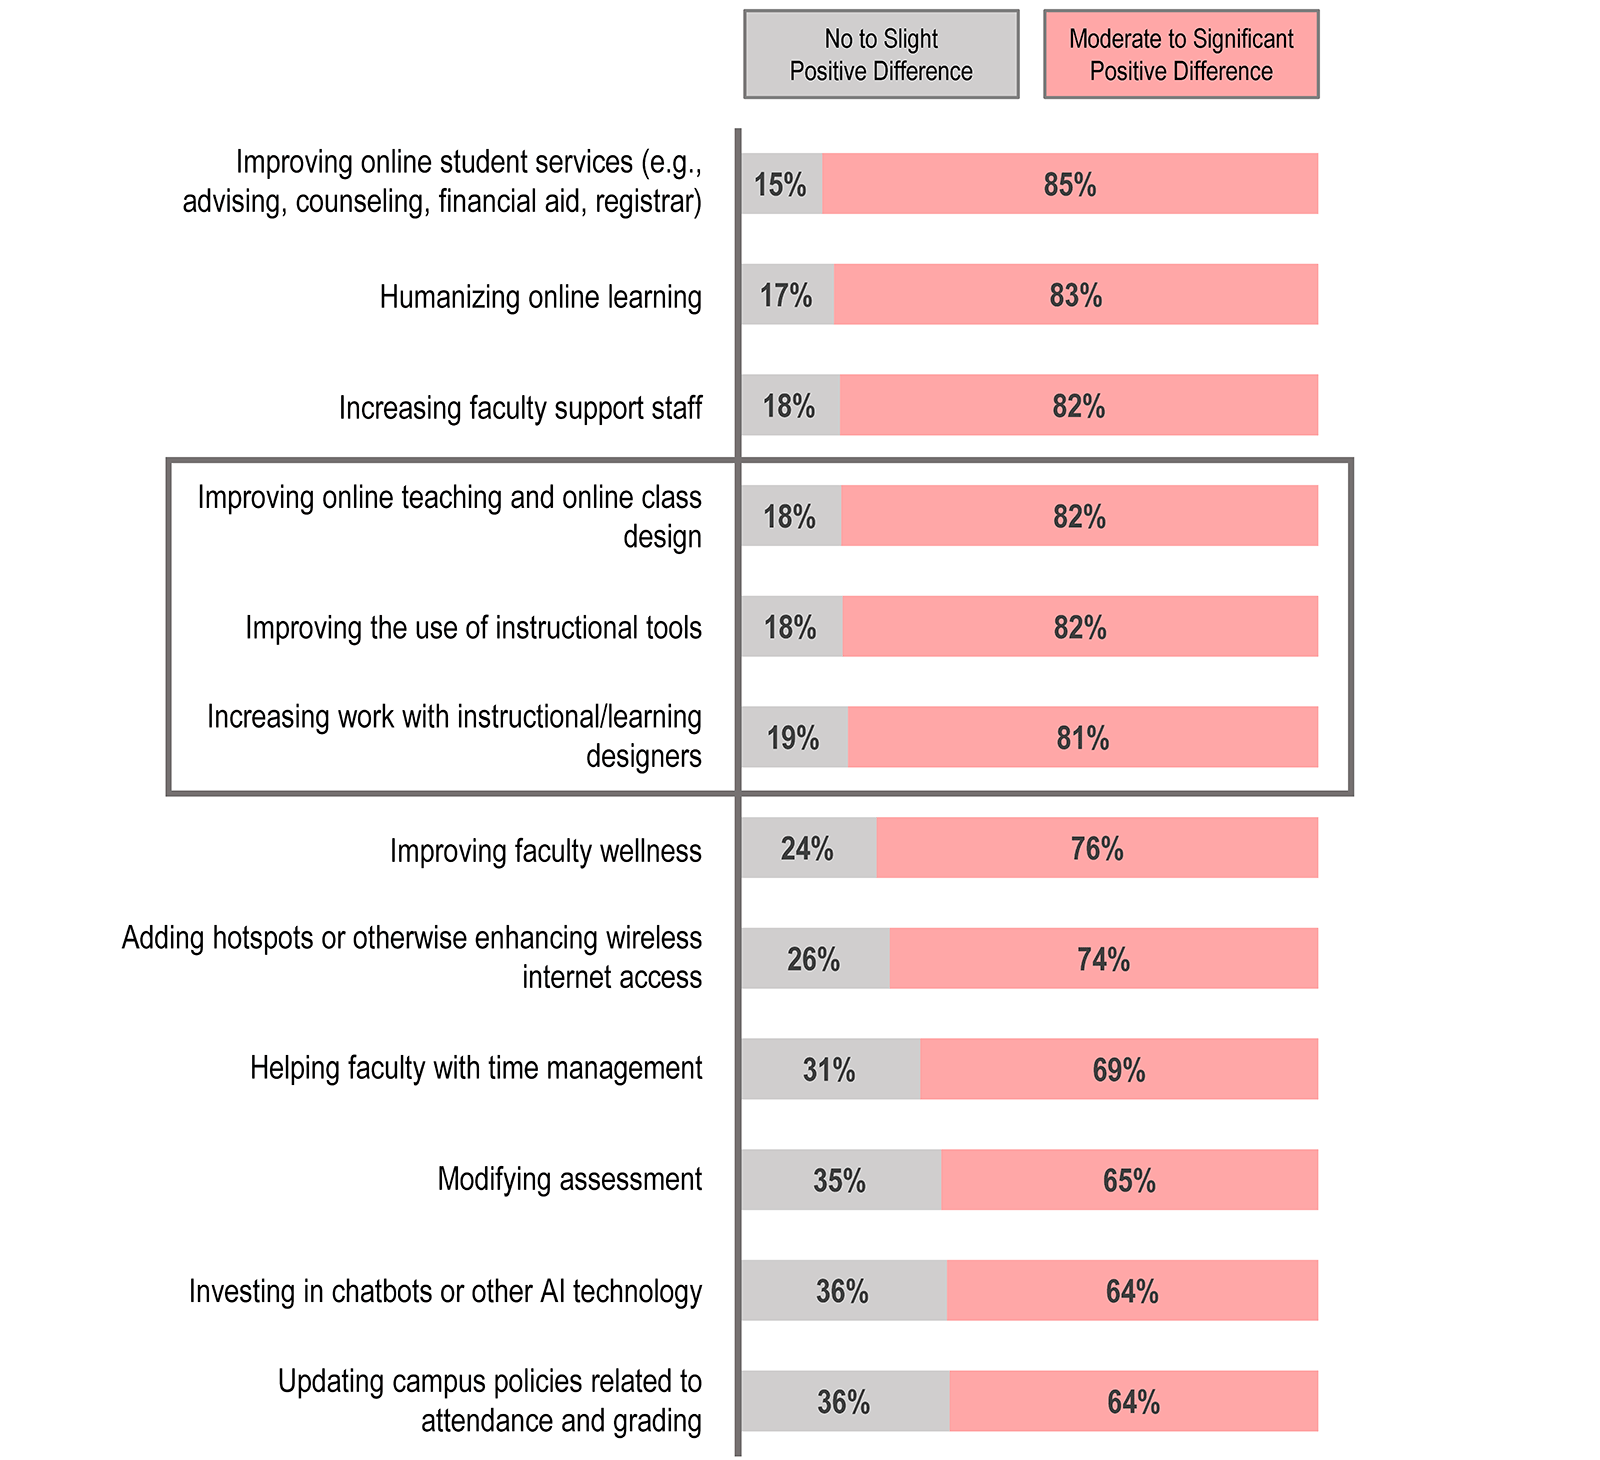 Bar graph showing number of respondents who felt that summer planning made No to Slight Positive Difference (NP) or Moderate to
Significant Positive Difference (MS) in each category.
Improving online student services (e.g., advising, counseling, financial aid, registrar) NP 15%; MS 85%.
Humanizing online learning NP 17%; MS 83%.
Increasing faculty support staff NP 18%; MS 82%.
Improving online teaching and online class design NP 18%; MS 82%.
Improving the use of instructional tools NP 18%; MS 82%.
Increasing work with instructional/learning designers NP 19%; MS 81%.
Improving faculty wellness NP 24%; MS 76%.
Adding hotspots or otherwise enhancing wireless internet access NP 26%; MS 74%.
Helping faculty with time management NP 31%; MS 69%.
Modifying assessment NP 35%; MS 65%.
Investing in chatbots or other AI technology NP 36%; MS 64%.
Updating campus policies related to attendance and grading NP 36%; MS 64%. 